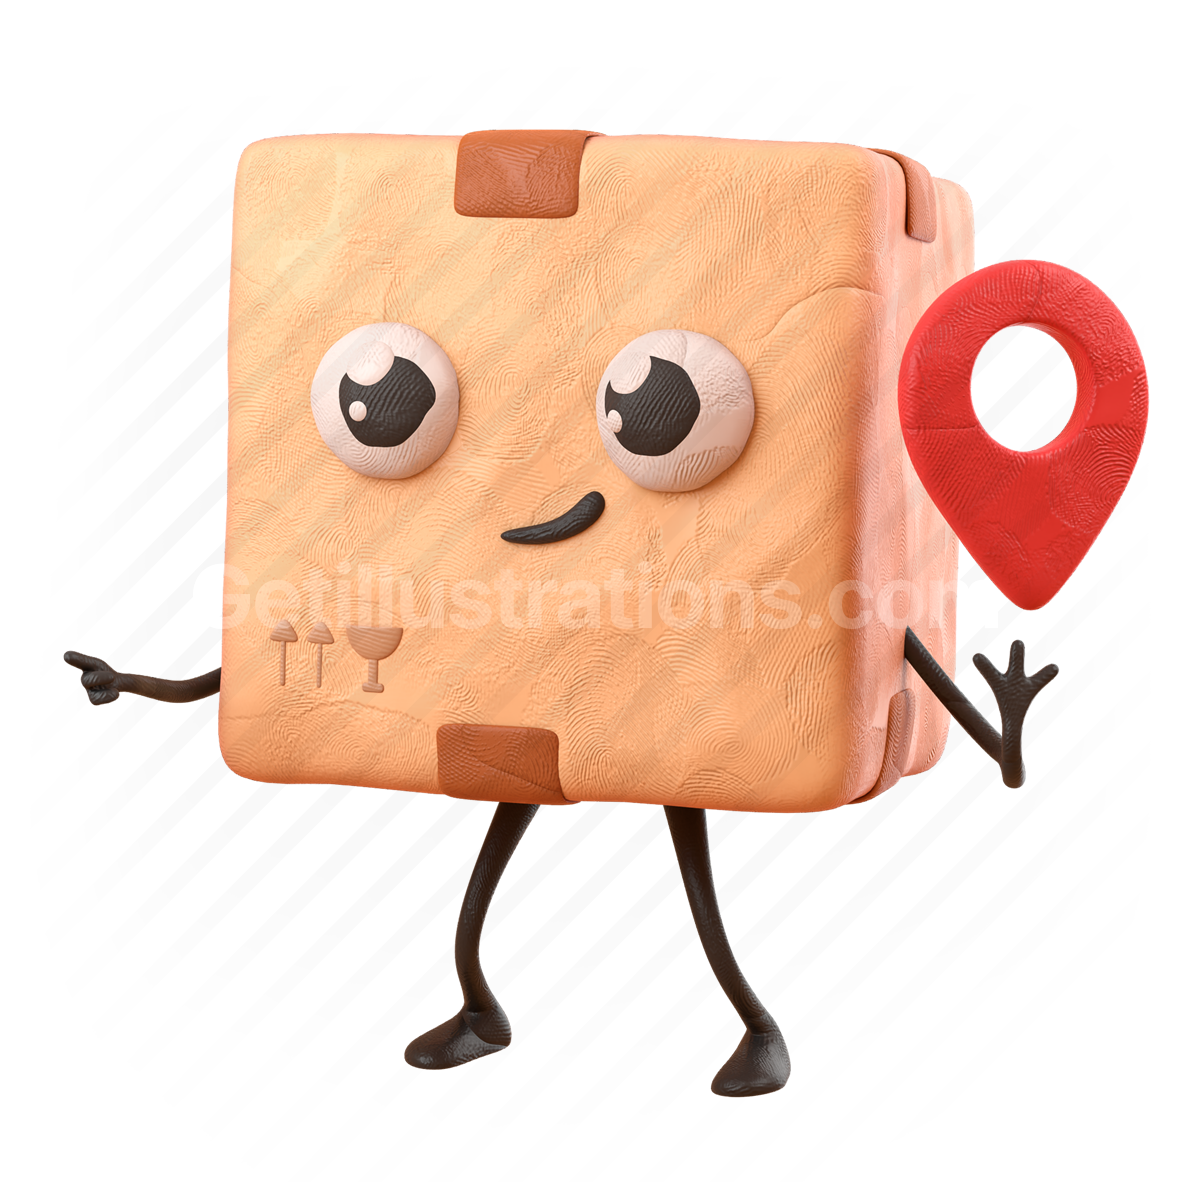 box, package, delivery, logistics, character, location, destination, deliver, direction, gps, map